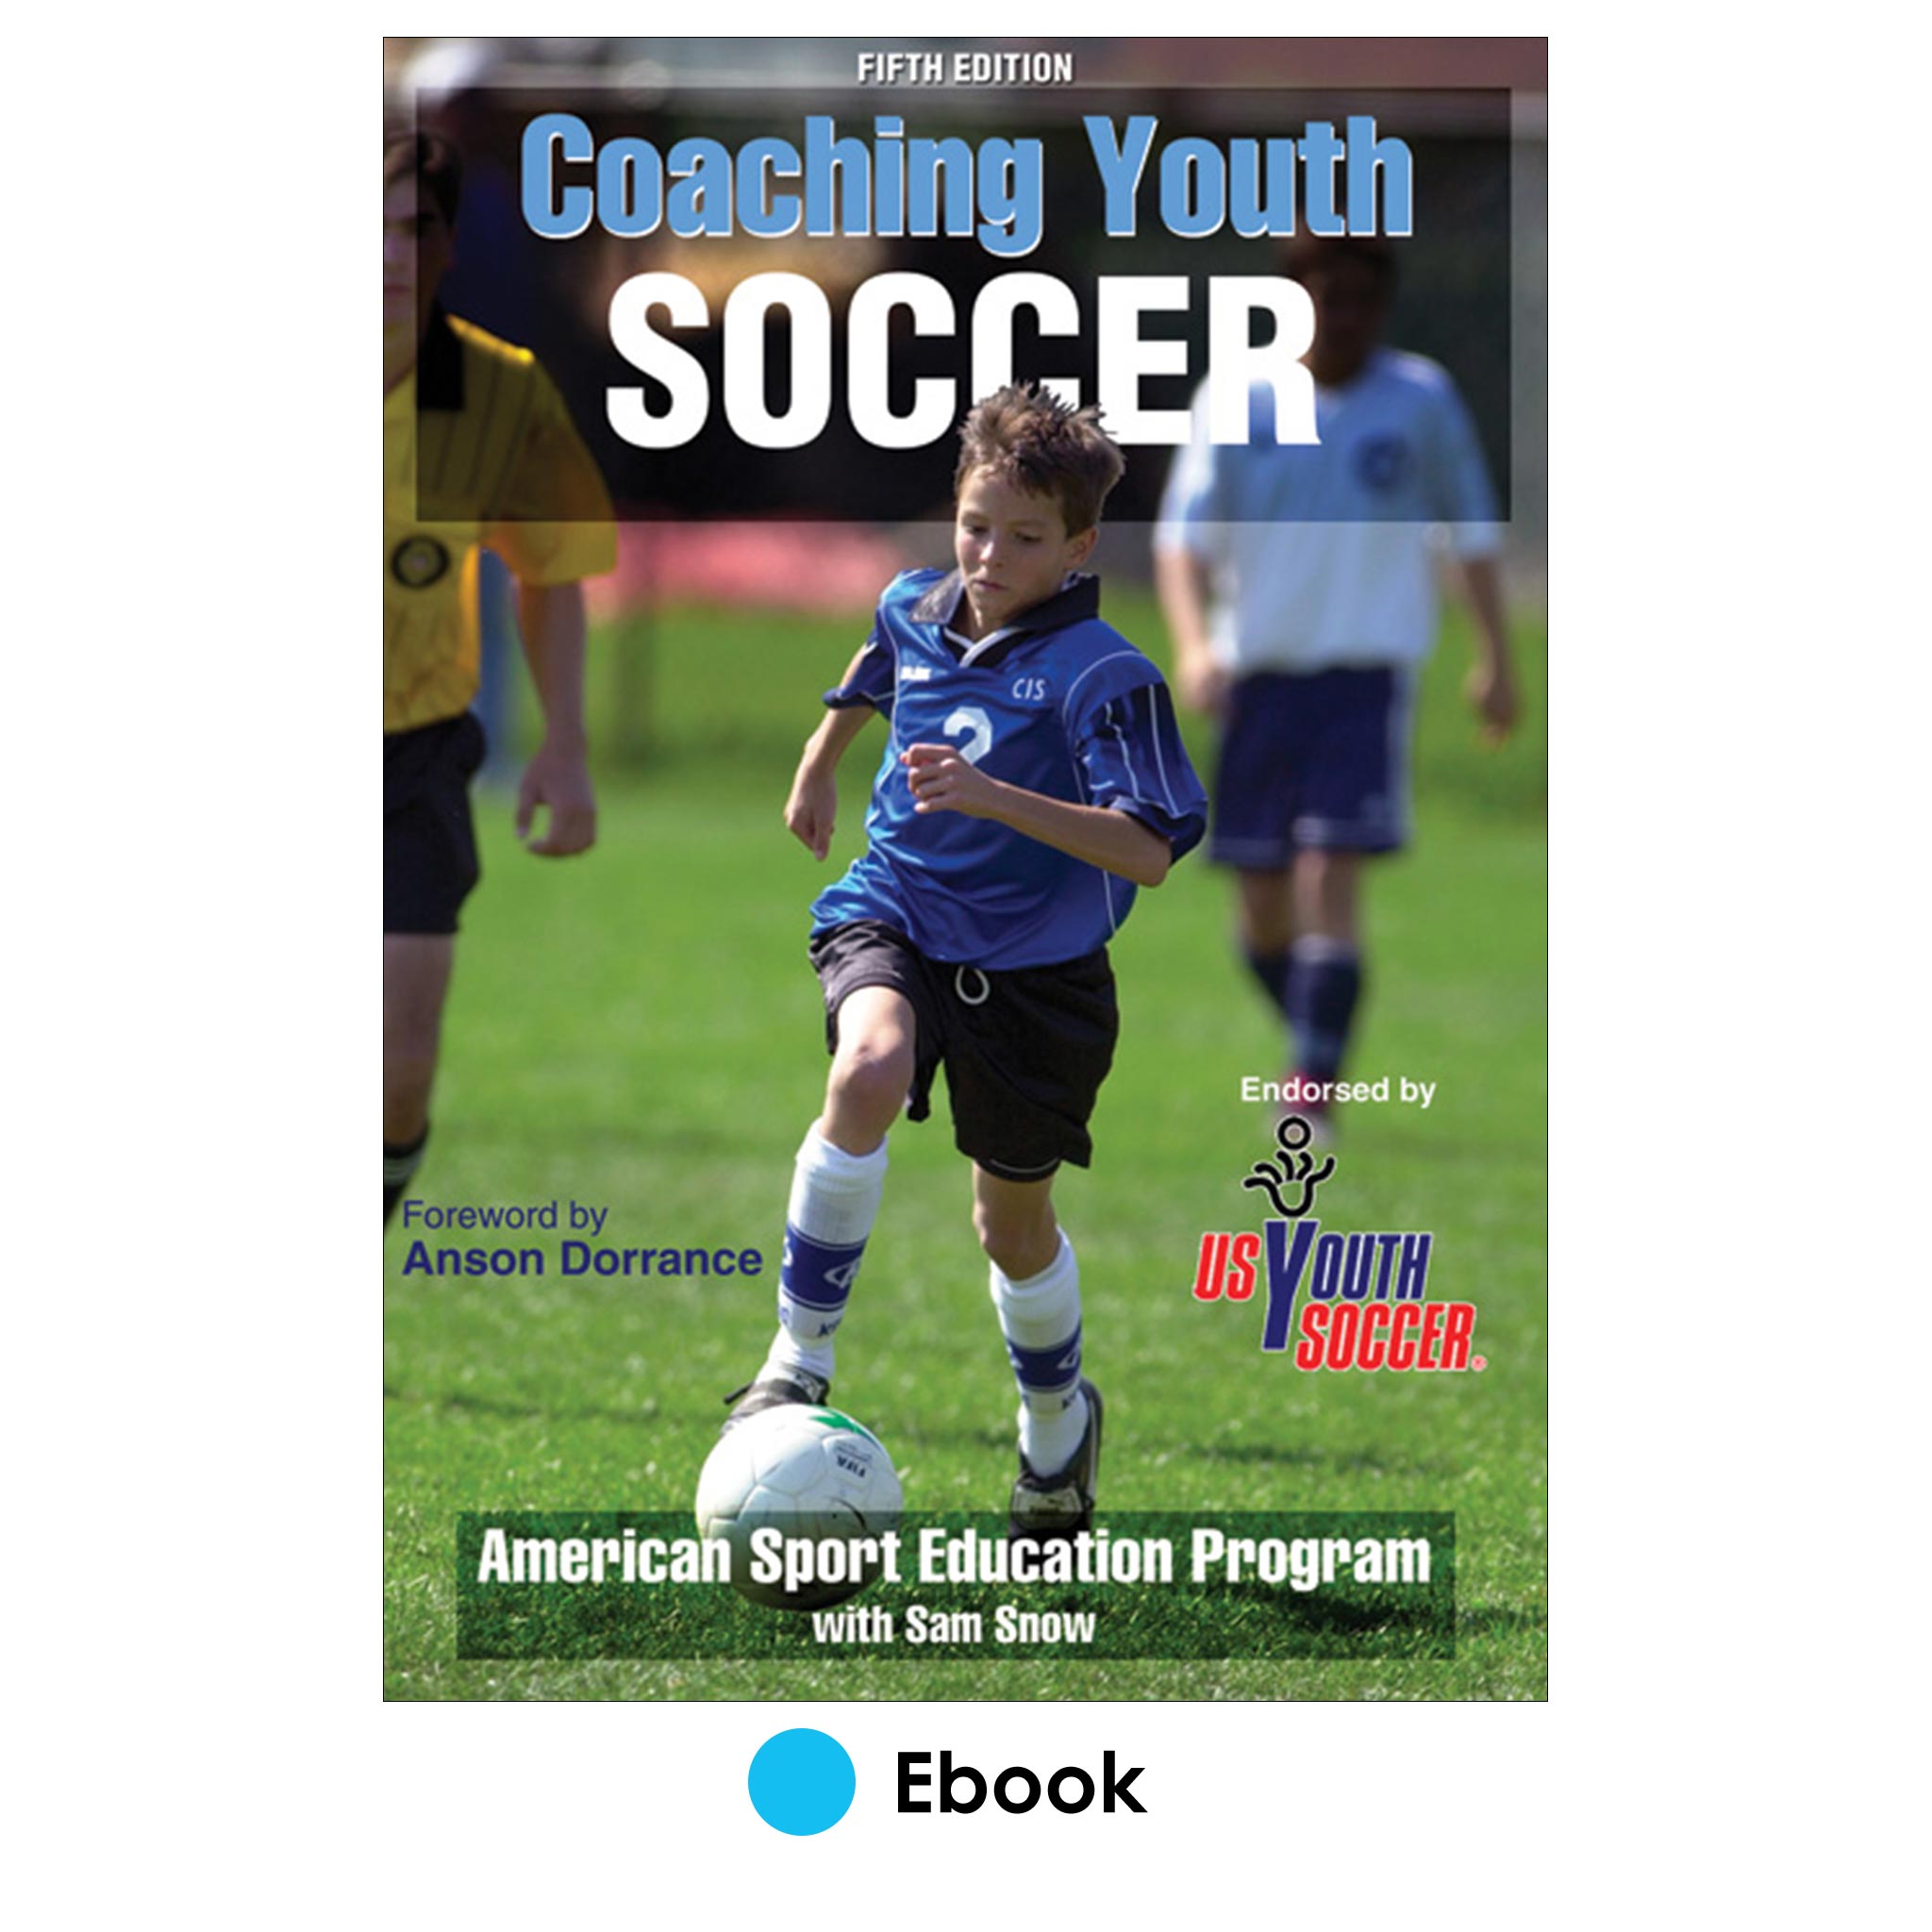 Coaching Youth Soccer 5th Edition PDF